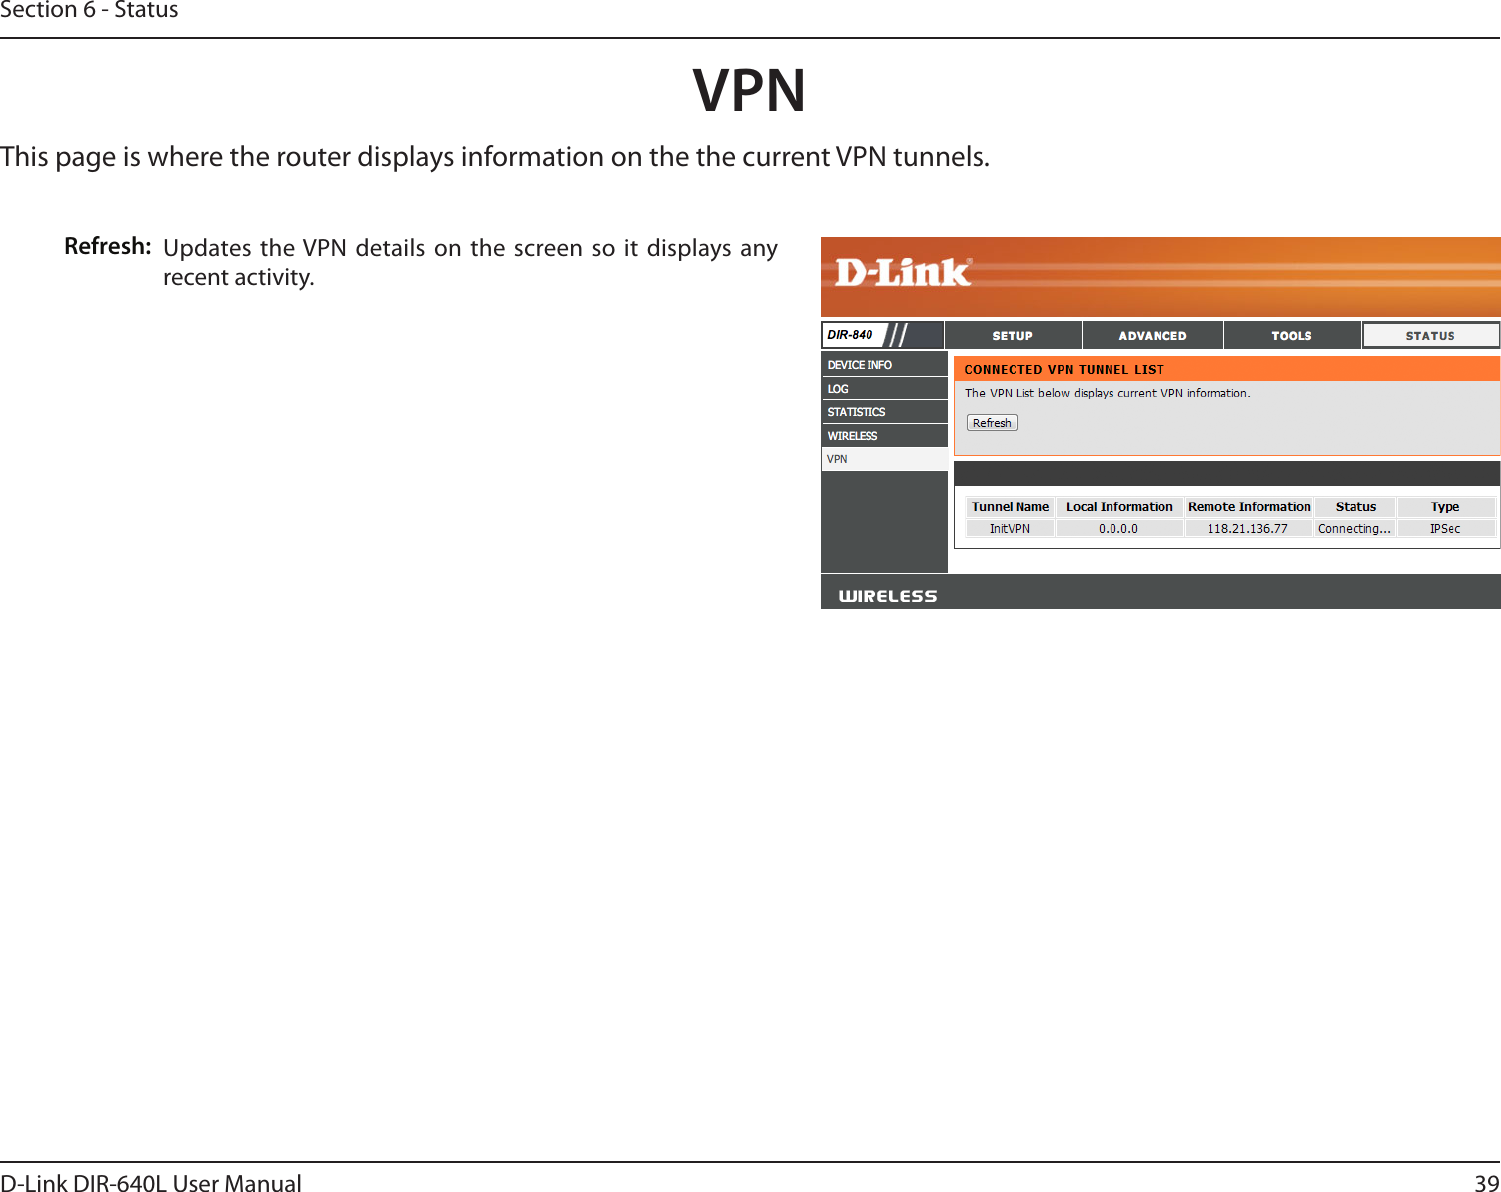 39D-Link DIR-640L User ManualSection 6 - StatusVPNRefresh: Updates the VPN details on  the screen so it  displays any recent activity.This page is where the router displays information on the the current VPN tunnels.